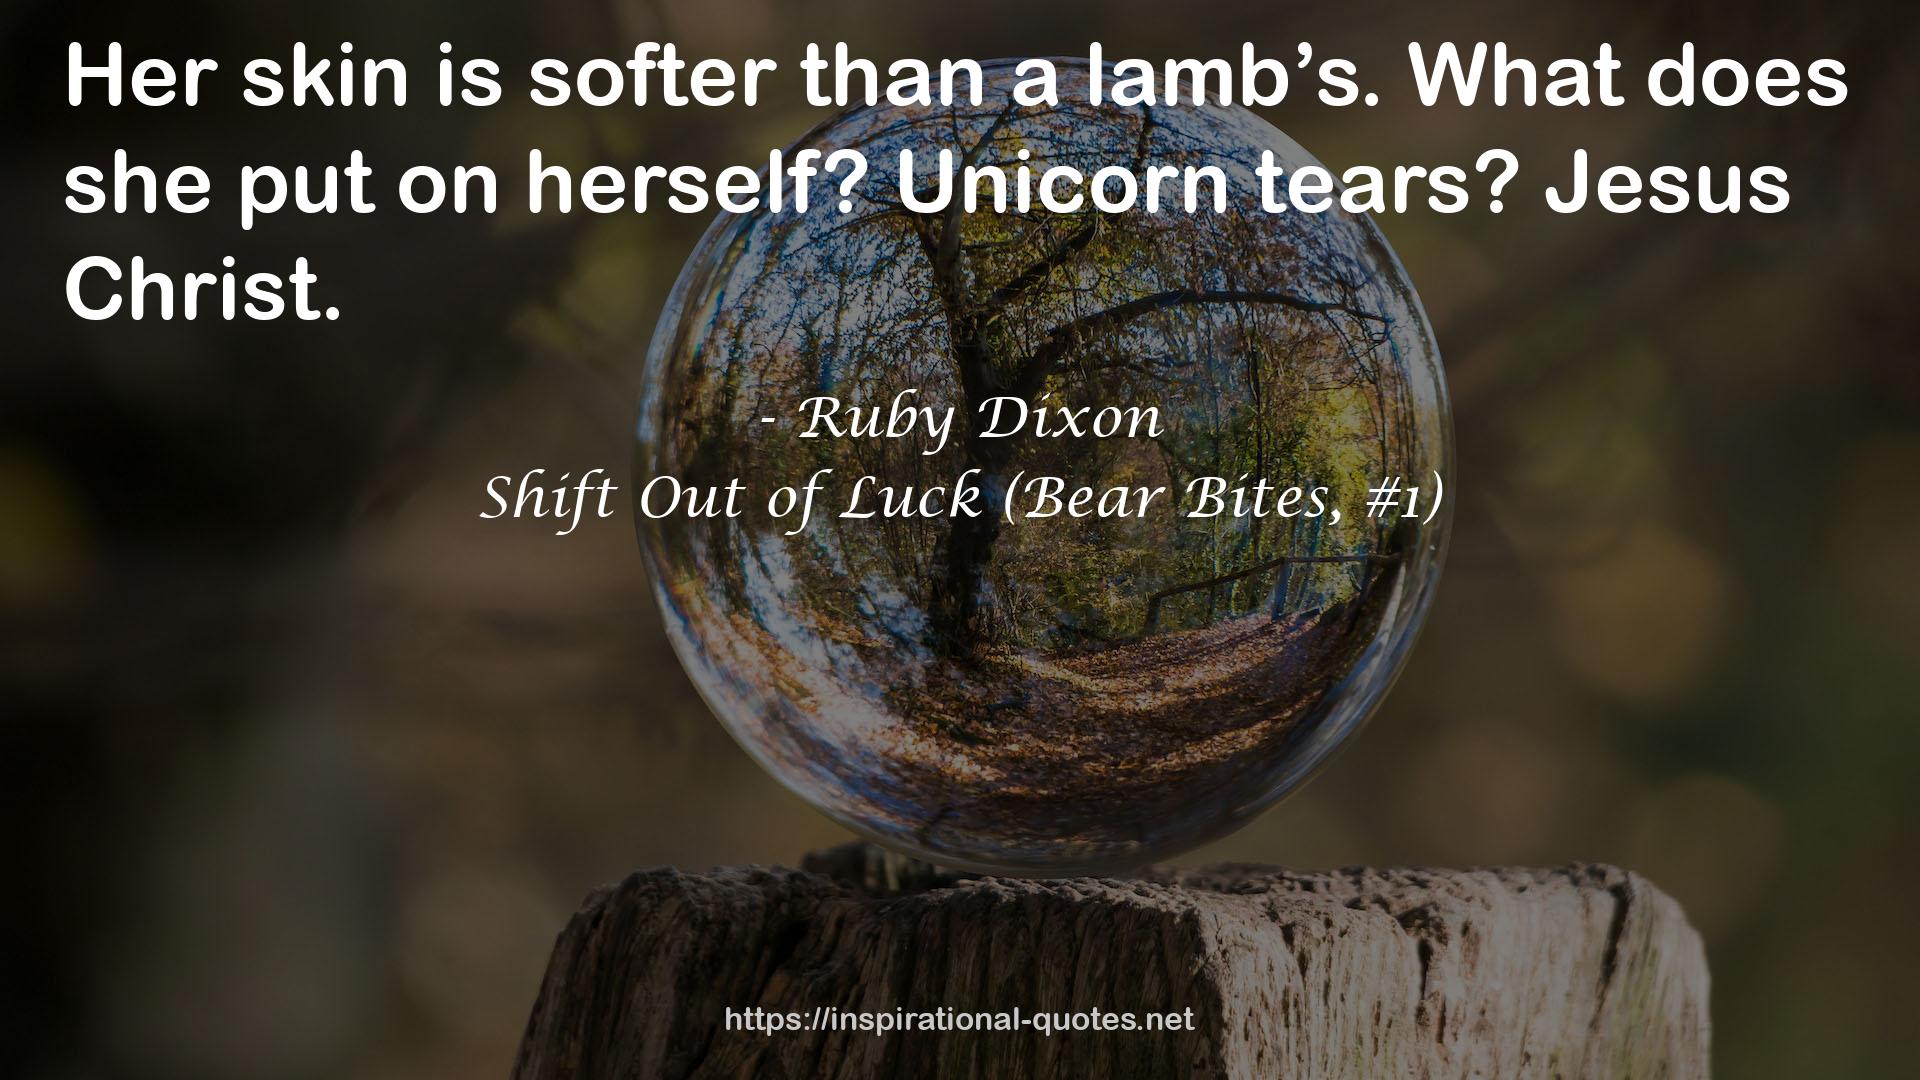 Shift Out of Luck (Bear Bites, #1) QUOTES